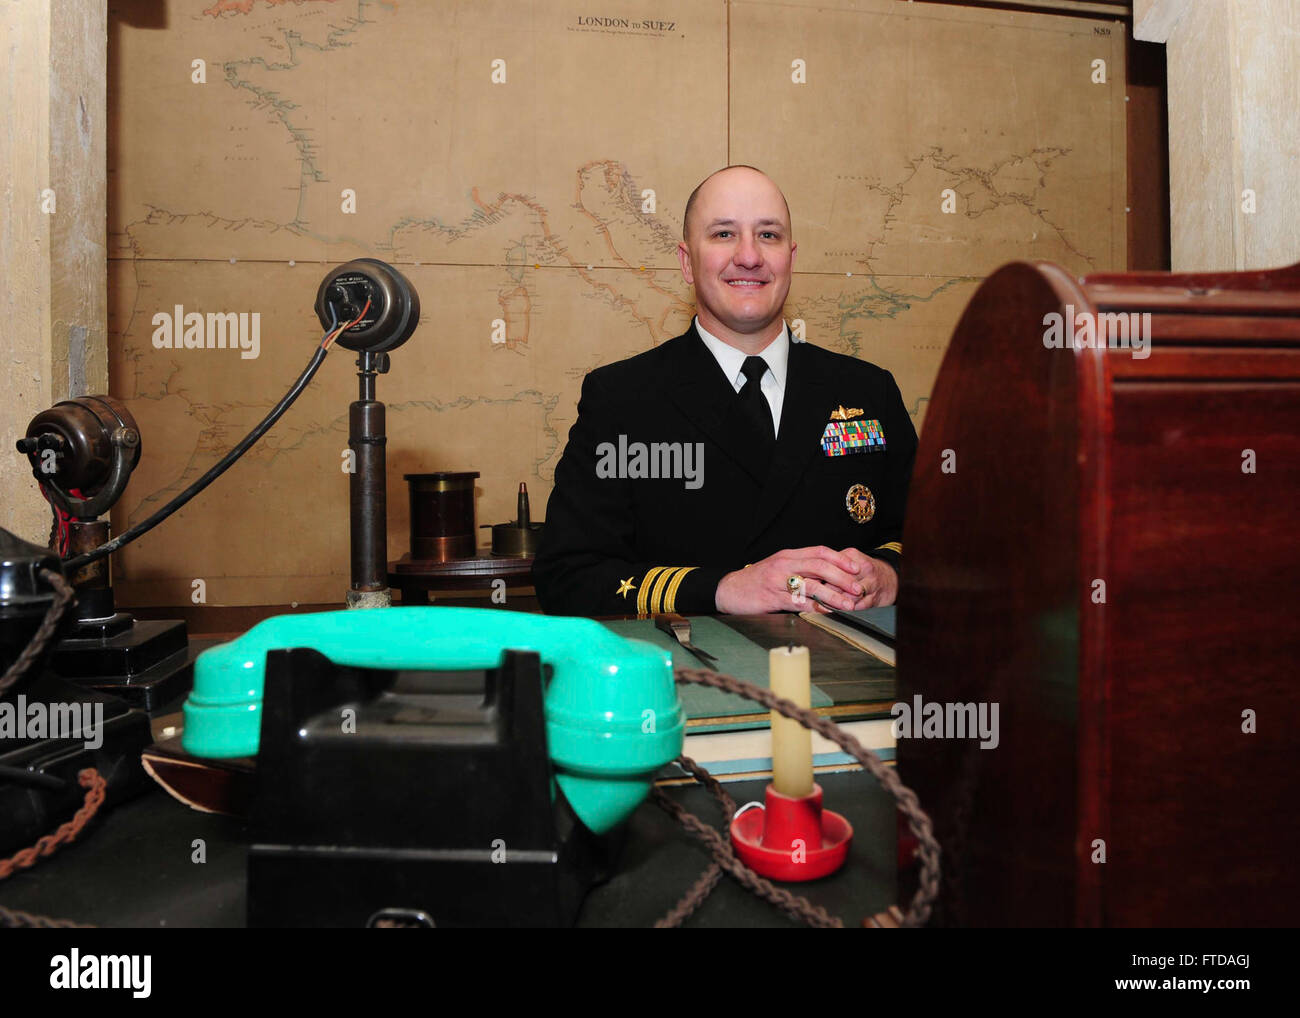 150324-N-BD333-095 PORTSMOUTH, United Kingdom (March 24, 2015) Cmdr. Paul Allgeier, executive officer of the Arleigh-Burke class guided missile destroyer USS Winston S. Churchill (DDG 81), sits in Sir Winston S. Churchill’s chair in his office-bedroom during a tour of the Churchill War Rooms museum in London, March 24, 2015. Theodore Roosevelt Carrier Strike Group (TRCSG) leadership also attended the tour of the museum. Churchill, home-ported in Norfolk, is conducting naval operations in the U.S. 6th Fleet area of operations in support of U.S. national security interests in Europe. (U.S. Navy  Stock Photo